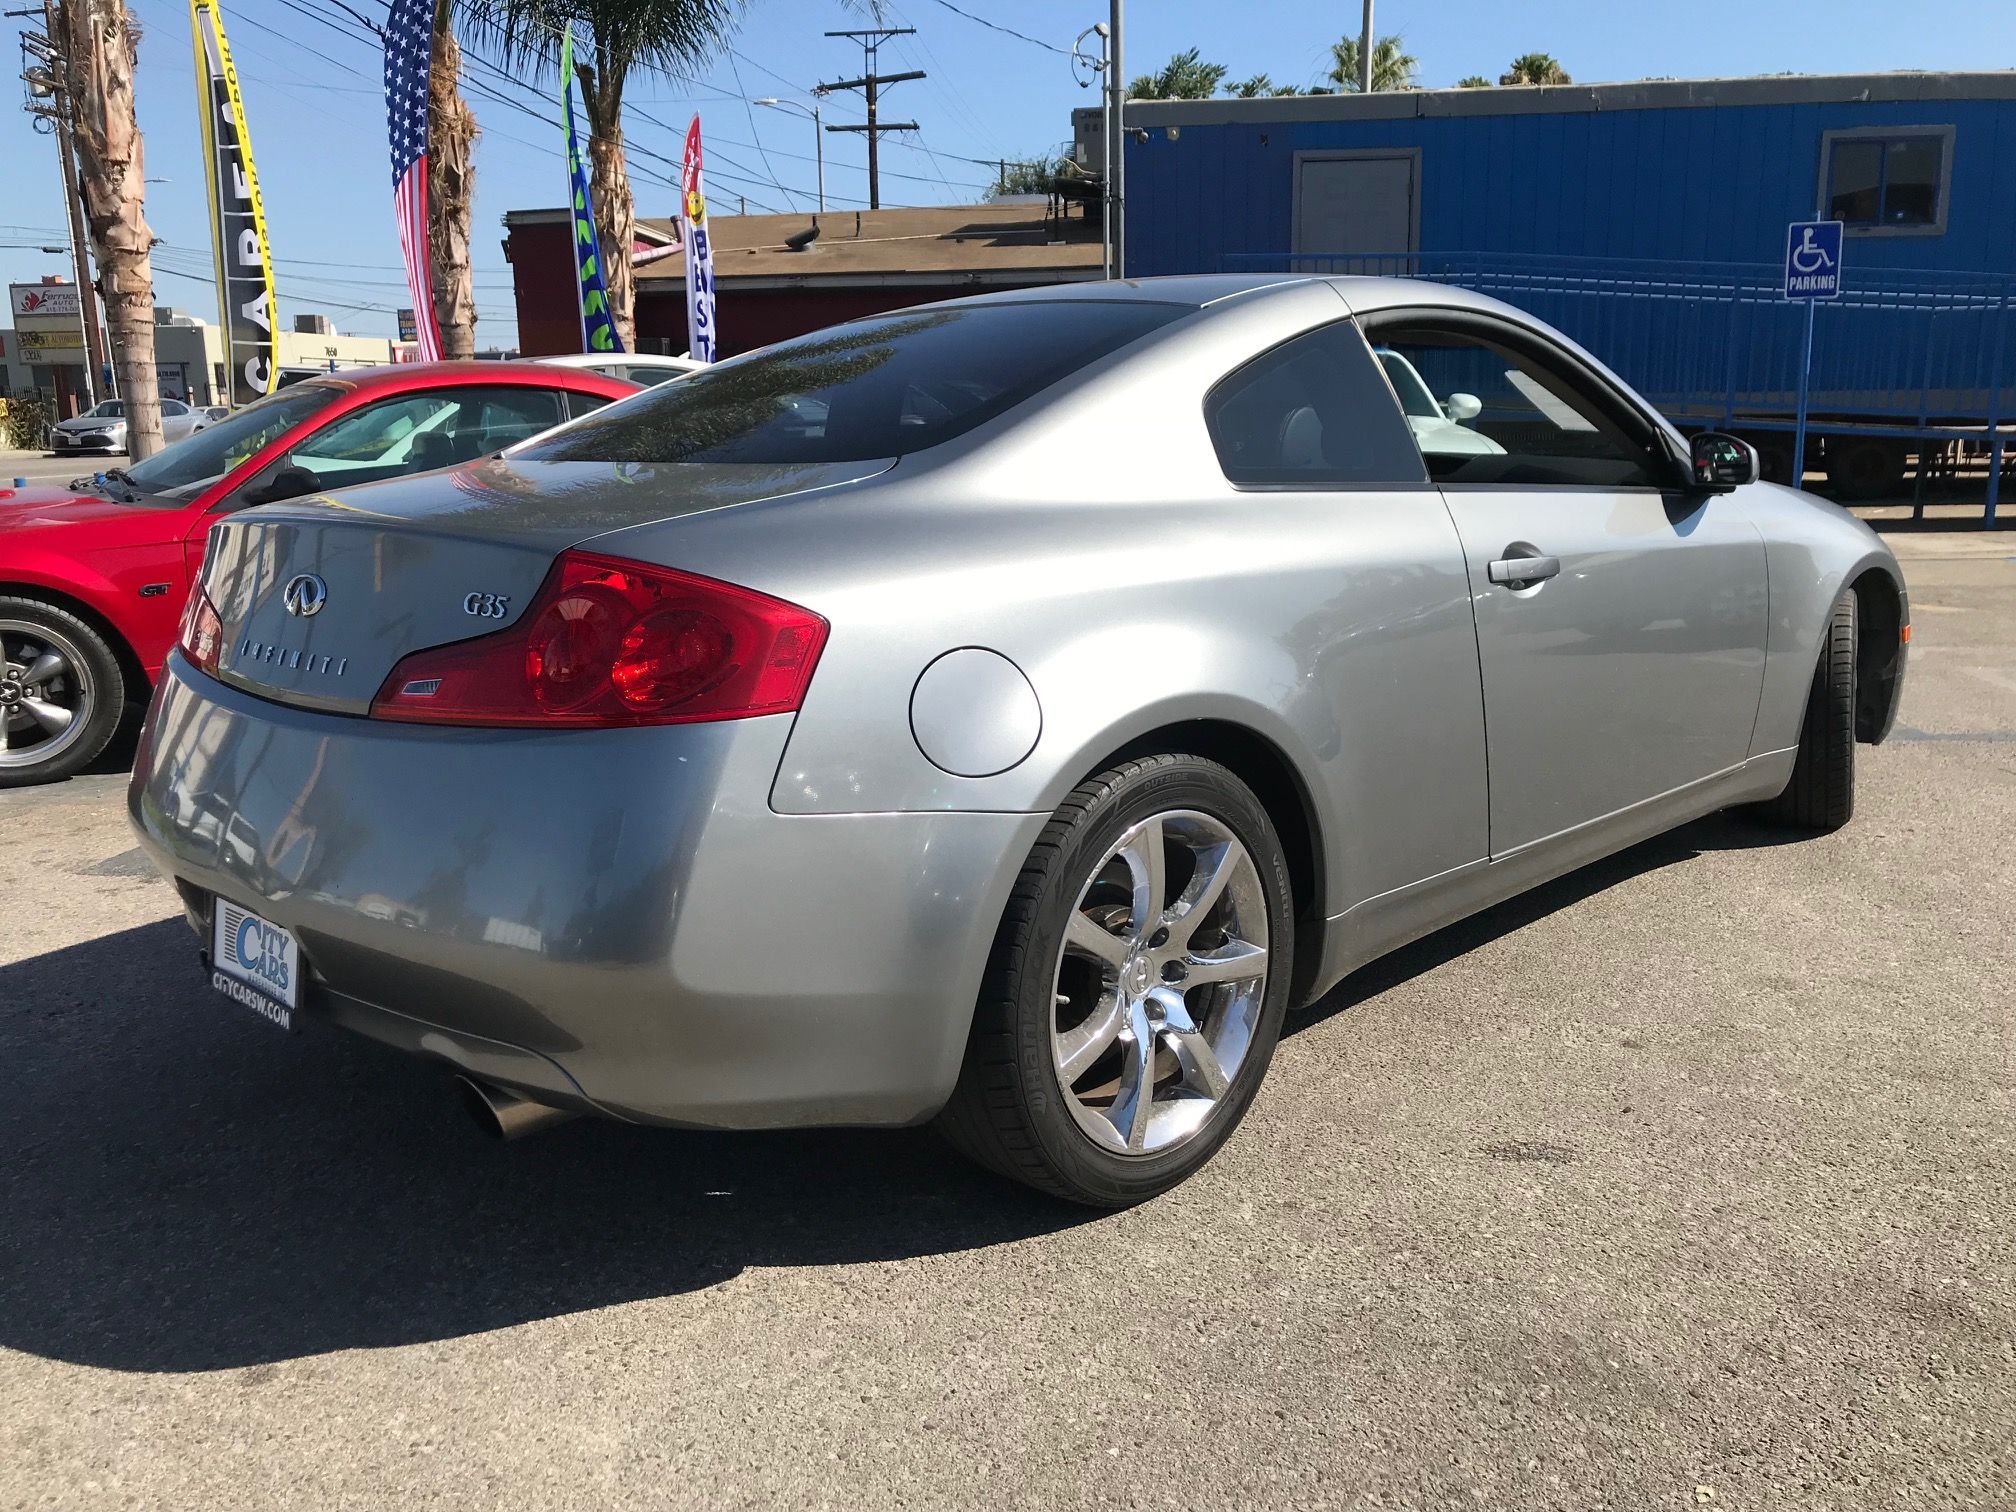 Used 2006 INFINITI G35 Coupe convertible at City Cars Warehouse Inc